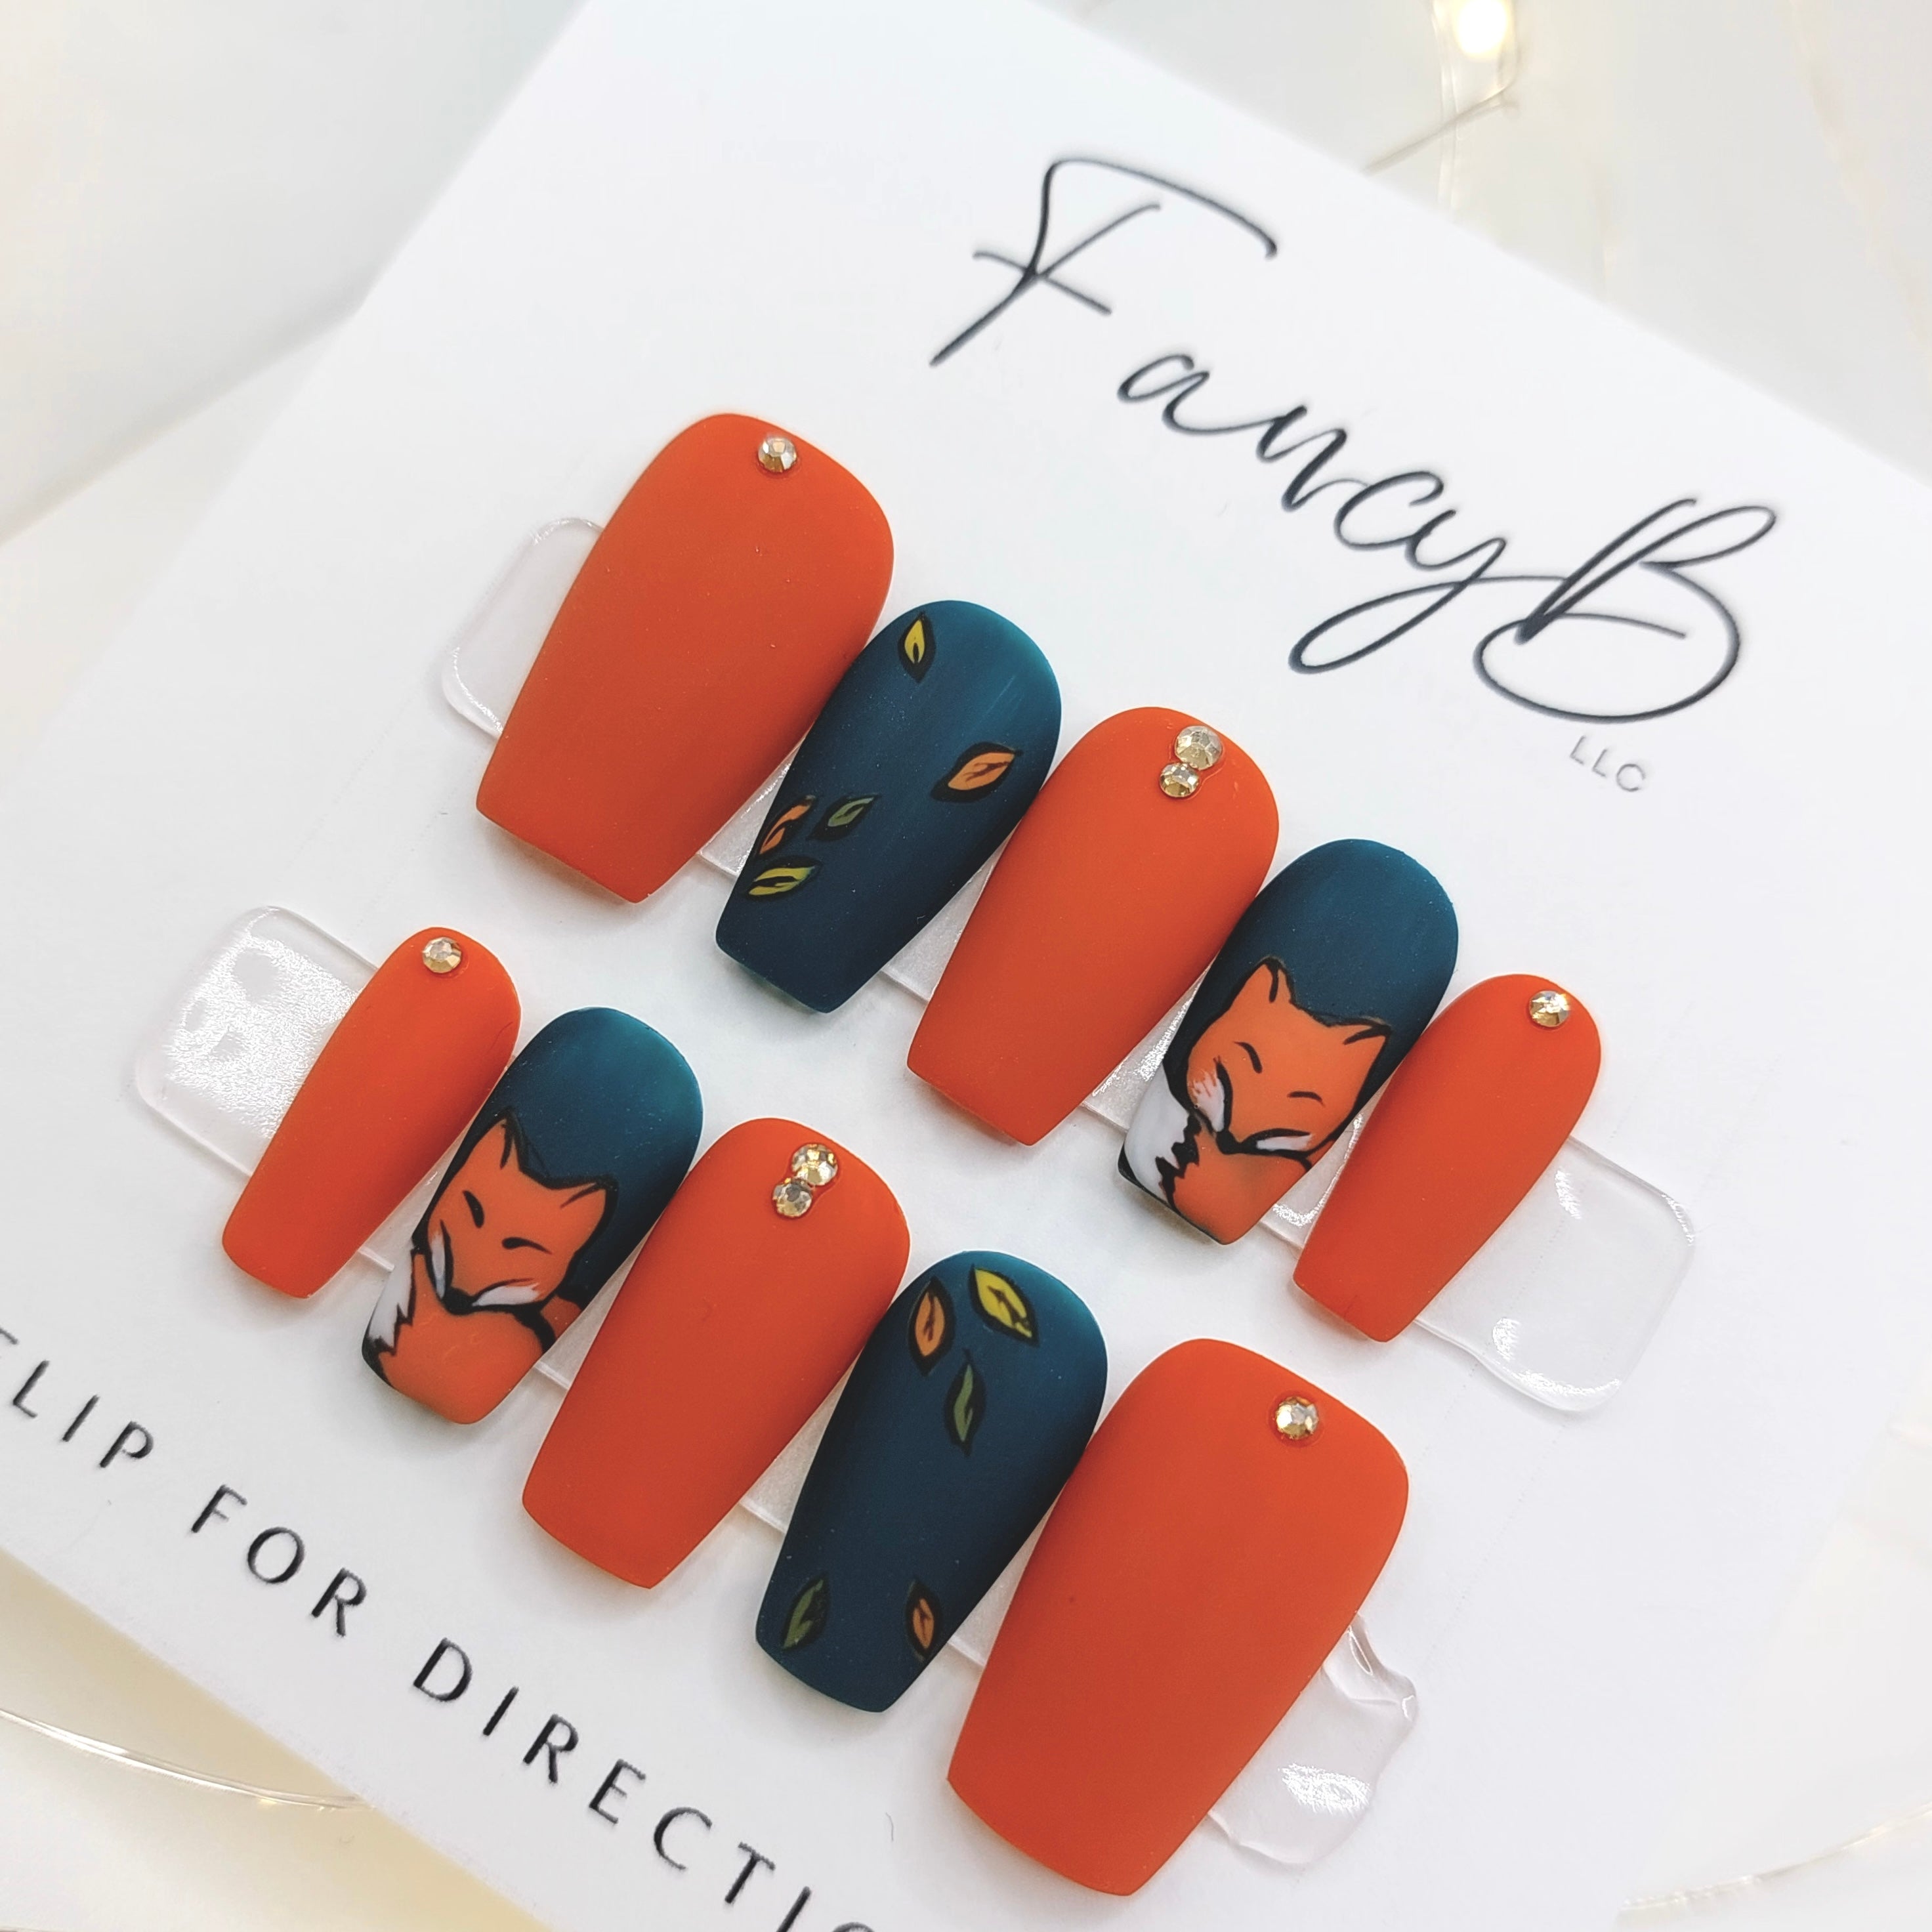 Custom press on nails, custom fox nails with hand painted foxes and leaves, gems, and orange and teal nail colors with matte finish on a short coffin shape. FancyB Nails.